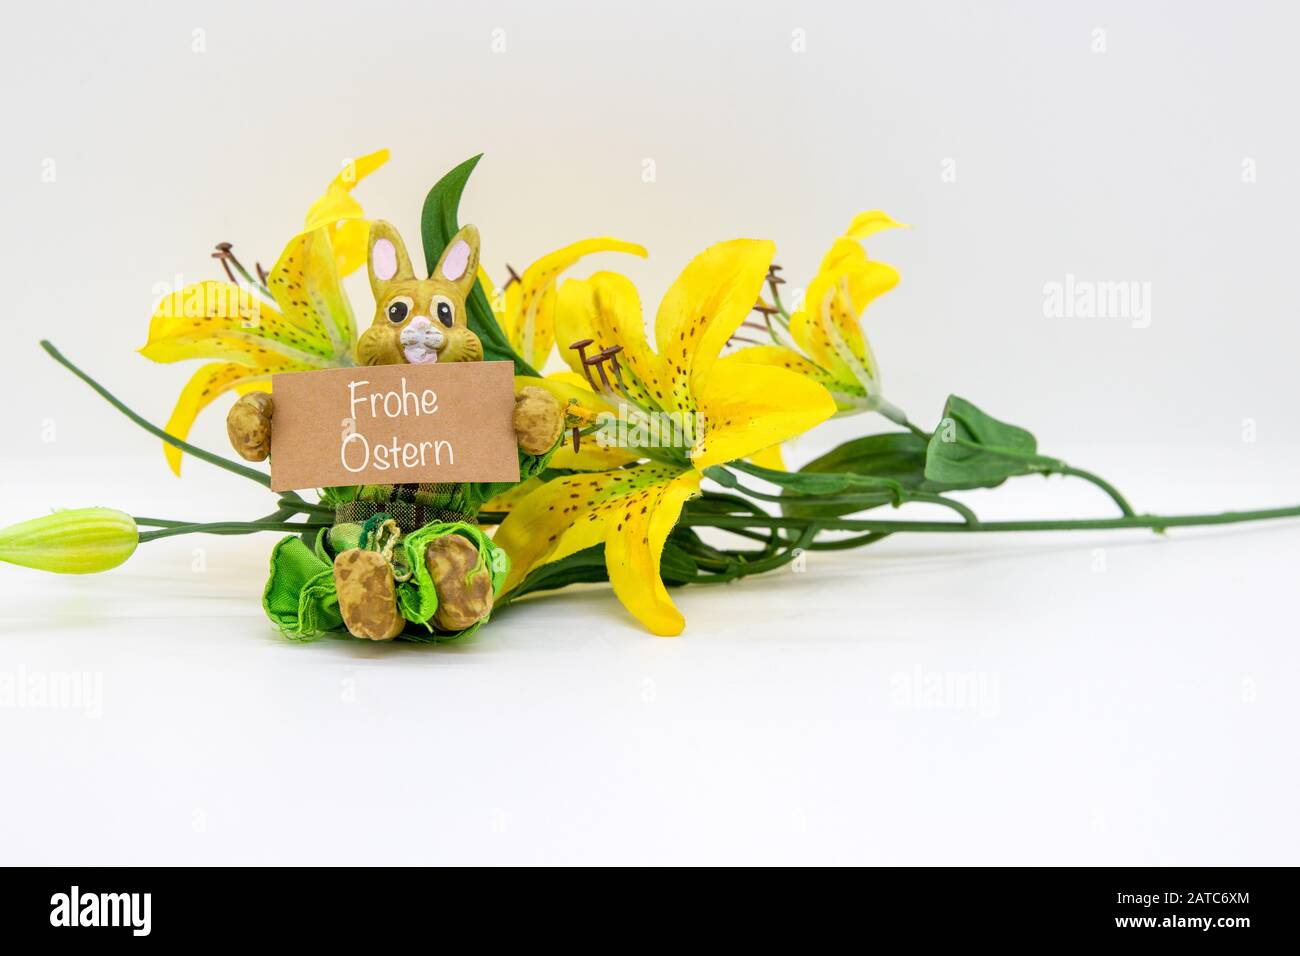 Frohe Ostern written on a sign, held by a bunny with a flower isolated on white background Stock Photo